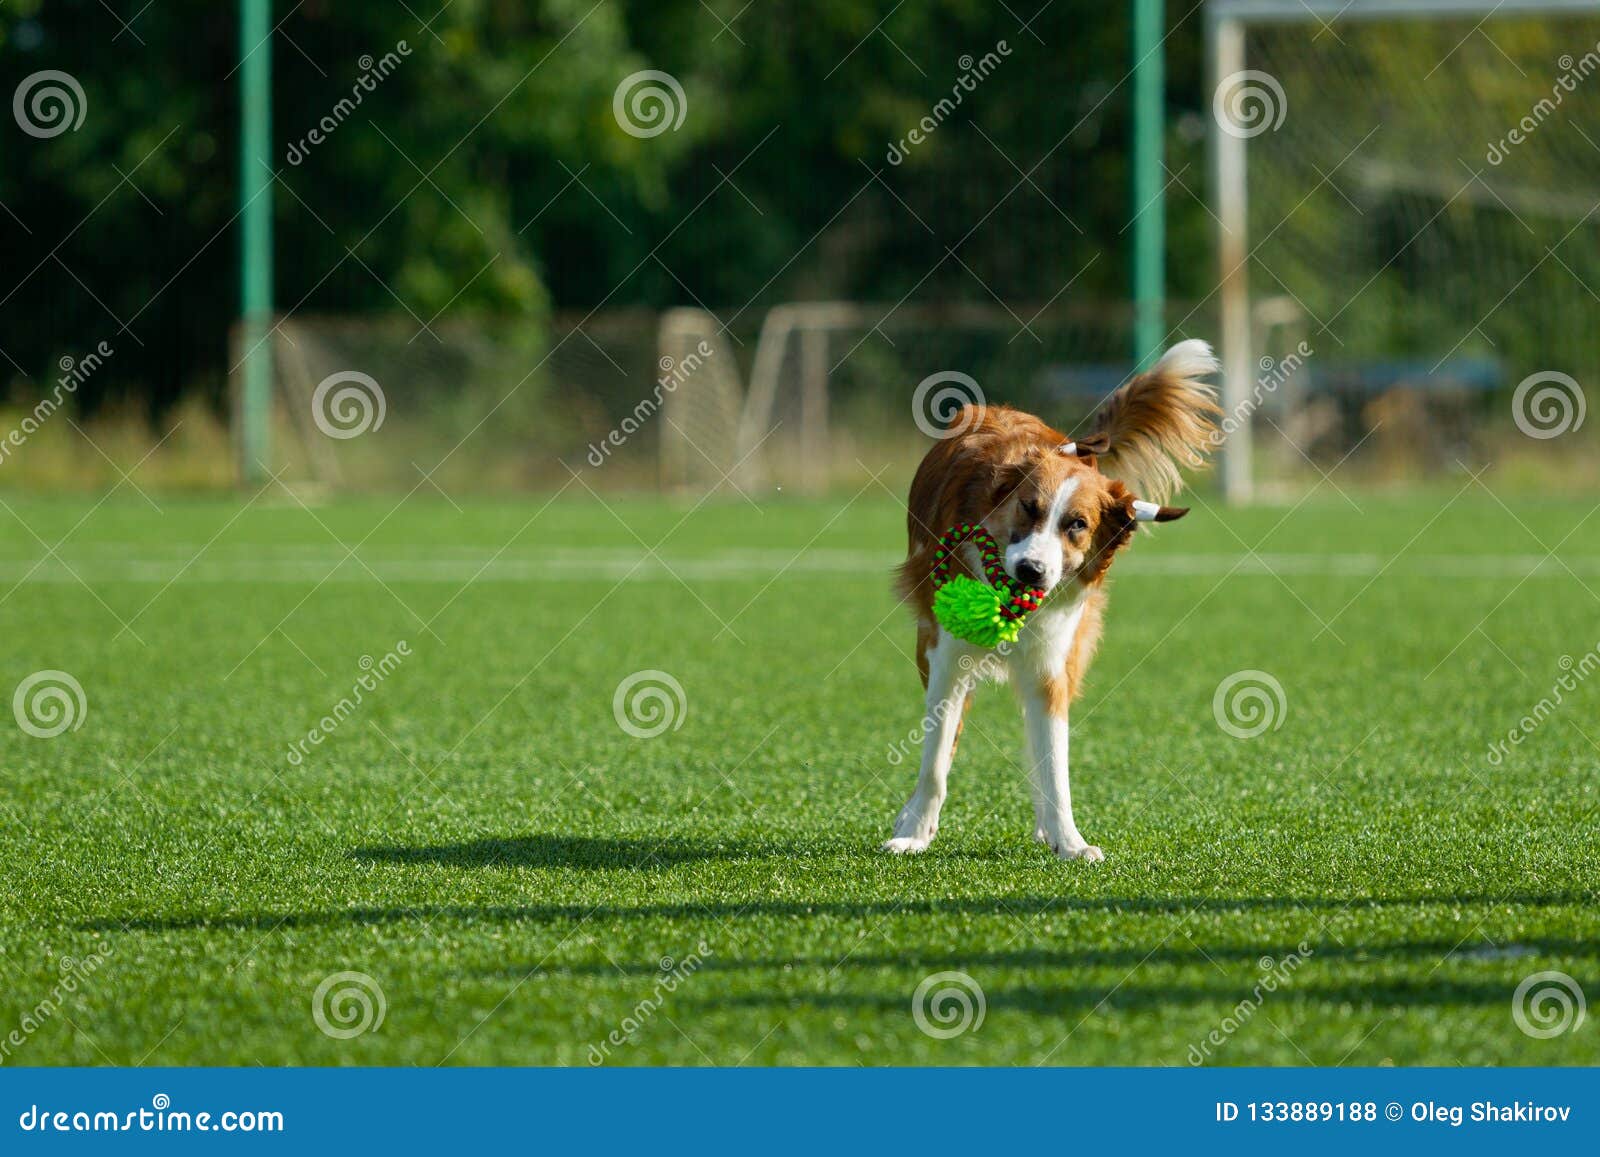 Dog At The Agility Competition Stock Photo Image Of Activity Obedience 133889188